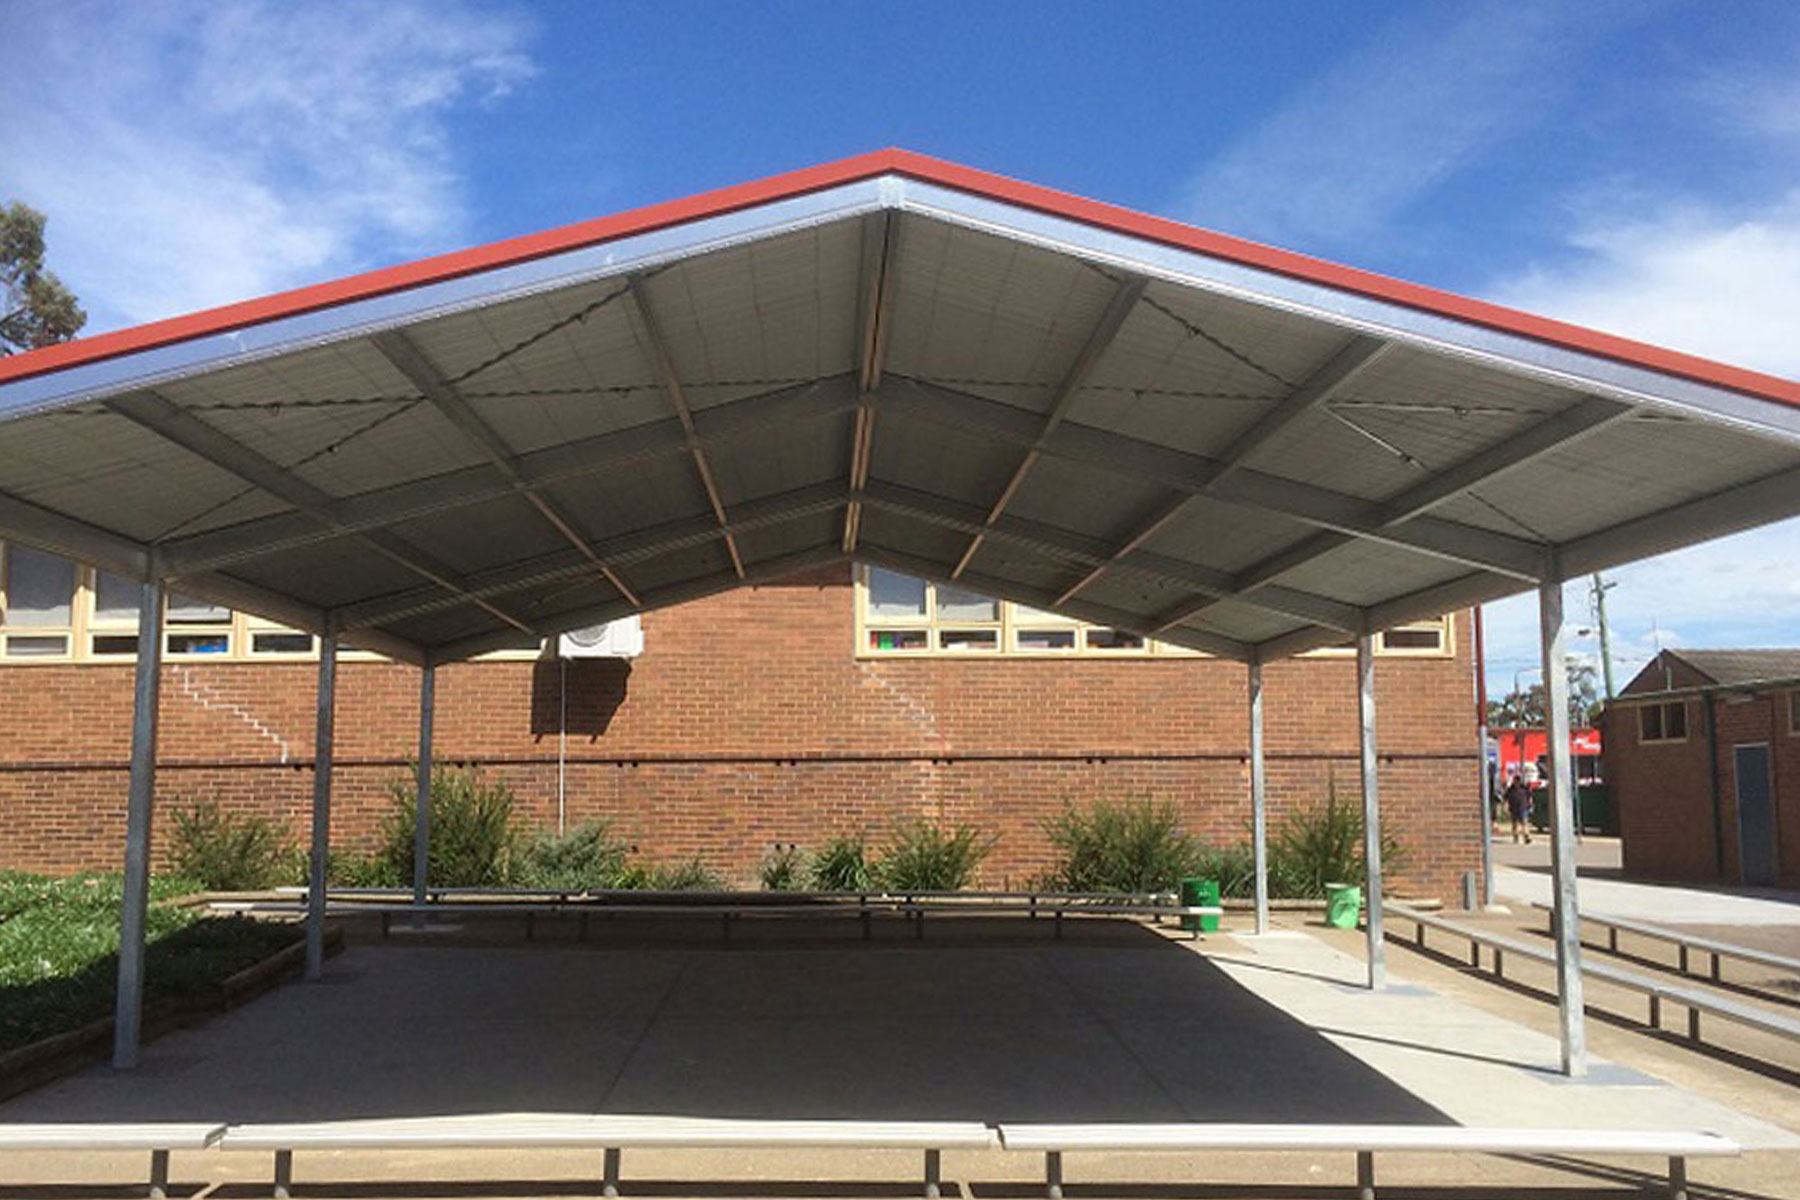 Covered Outdoor Learning Areas | COLA structure | School Projects